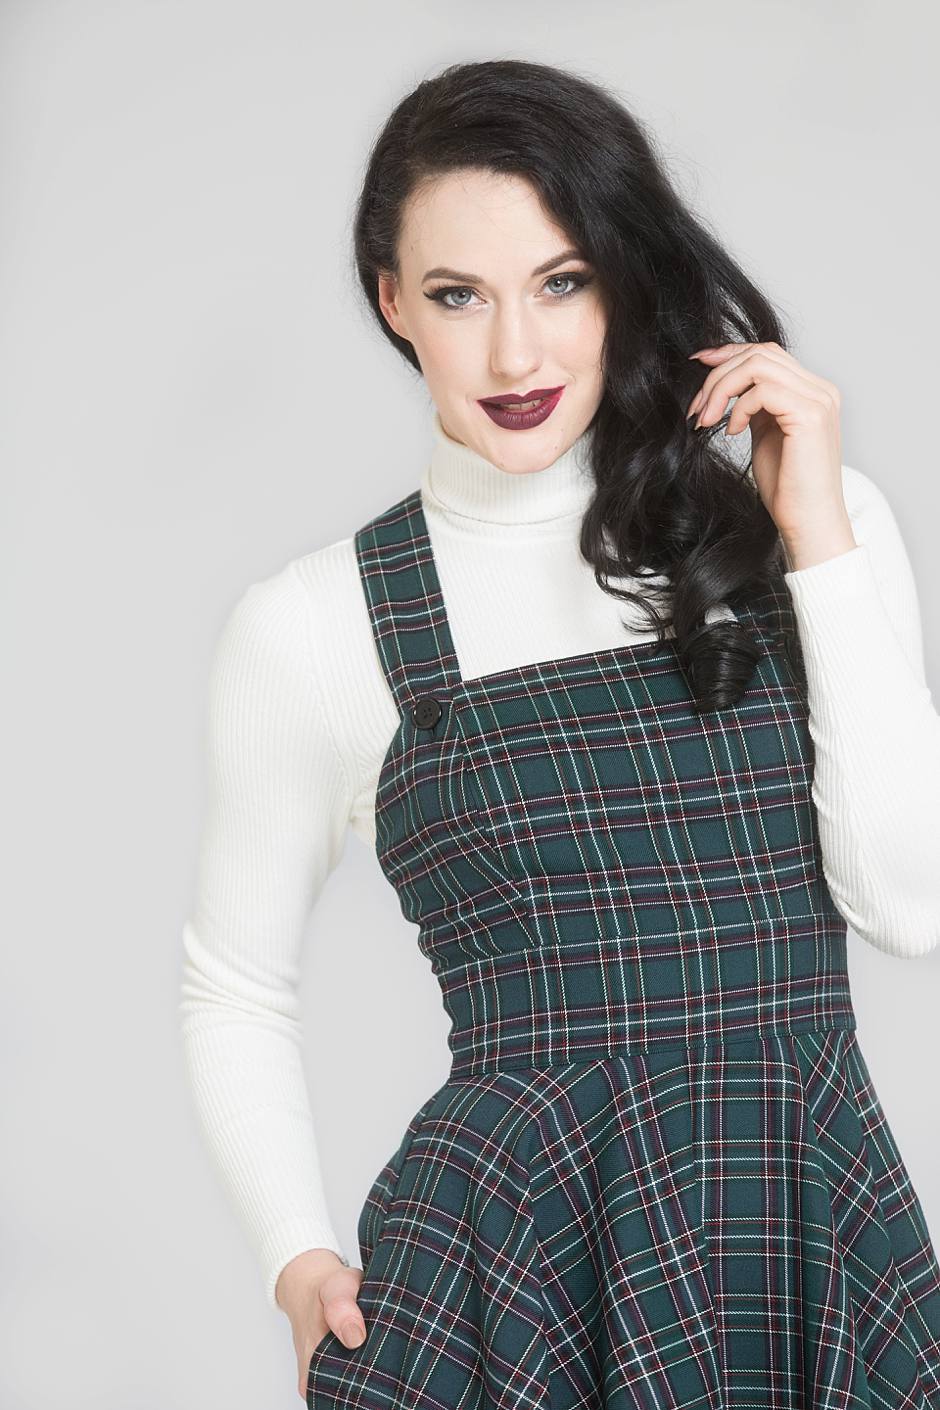 Women's Plus Size Pinafore Dresses in Sizes 10-32 | Simply Be